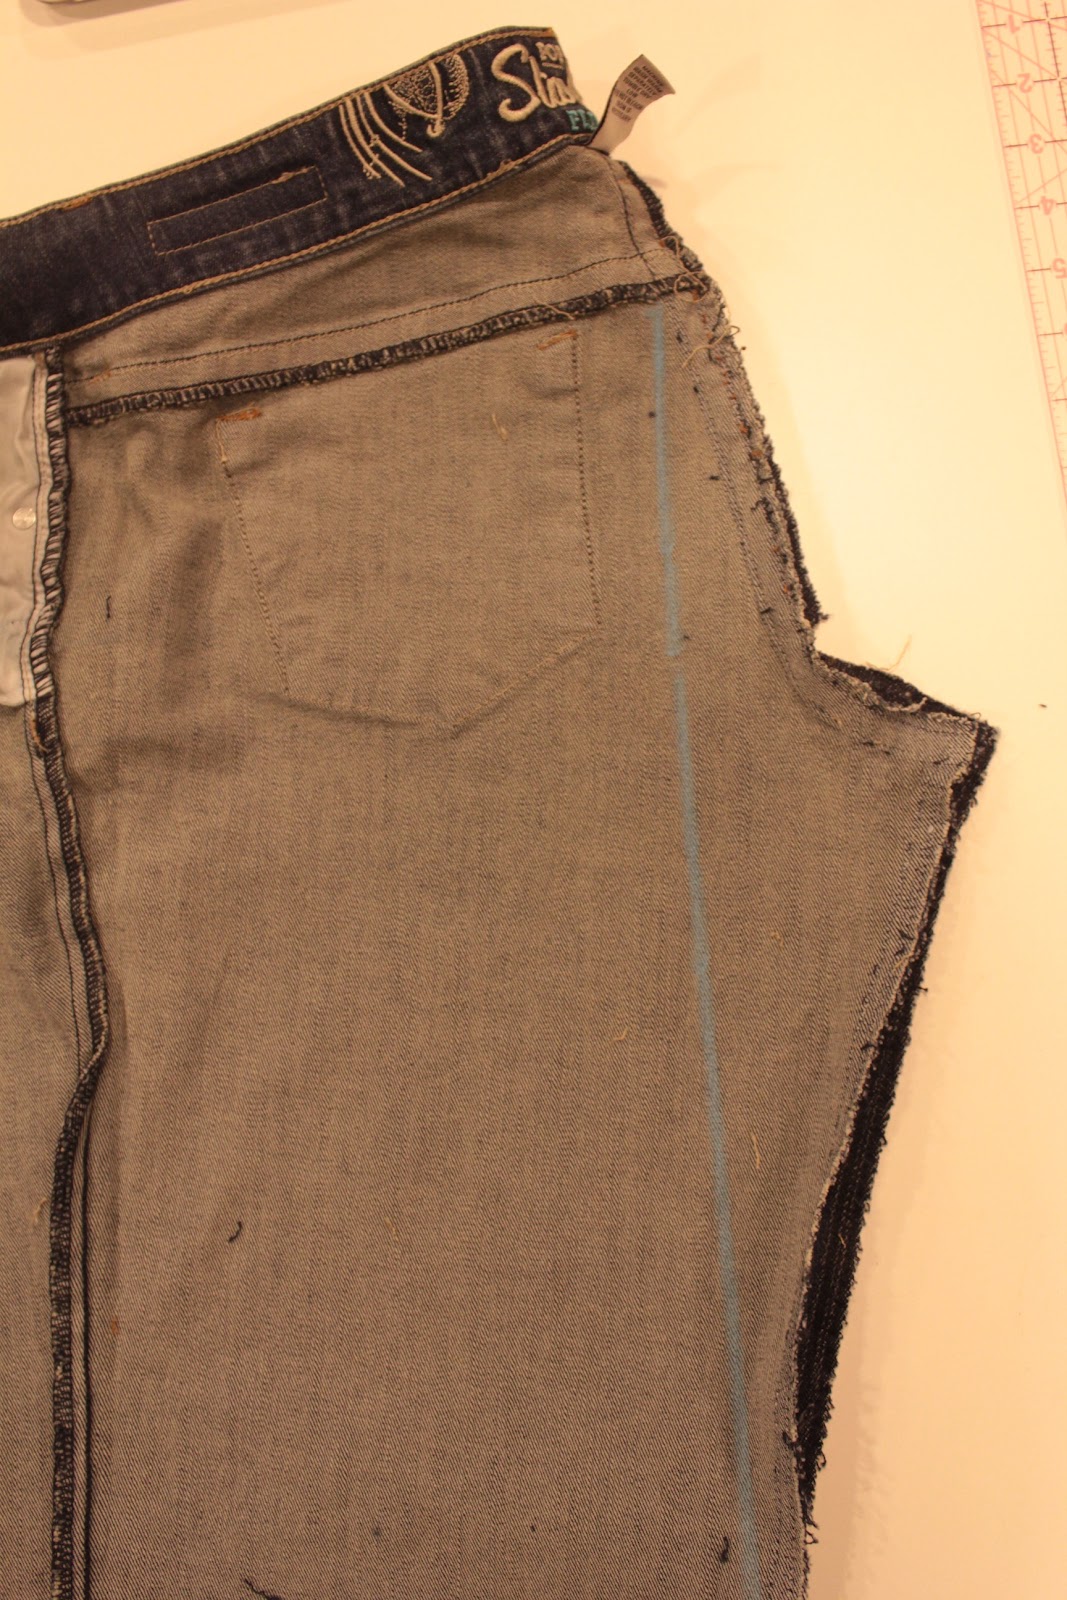 Bella Jean Boutique: Tutorial...Turn Your Jeans into a Skirt